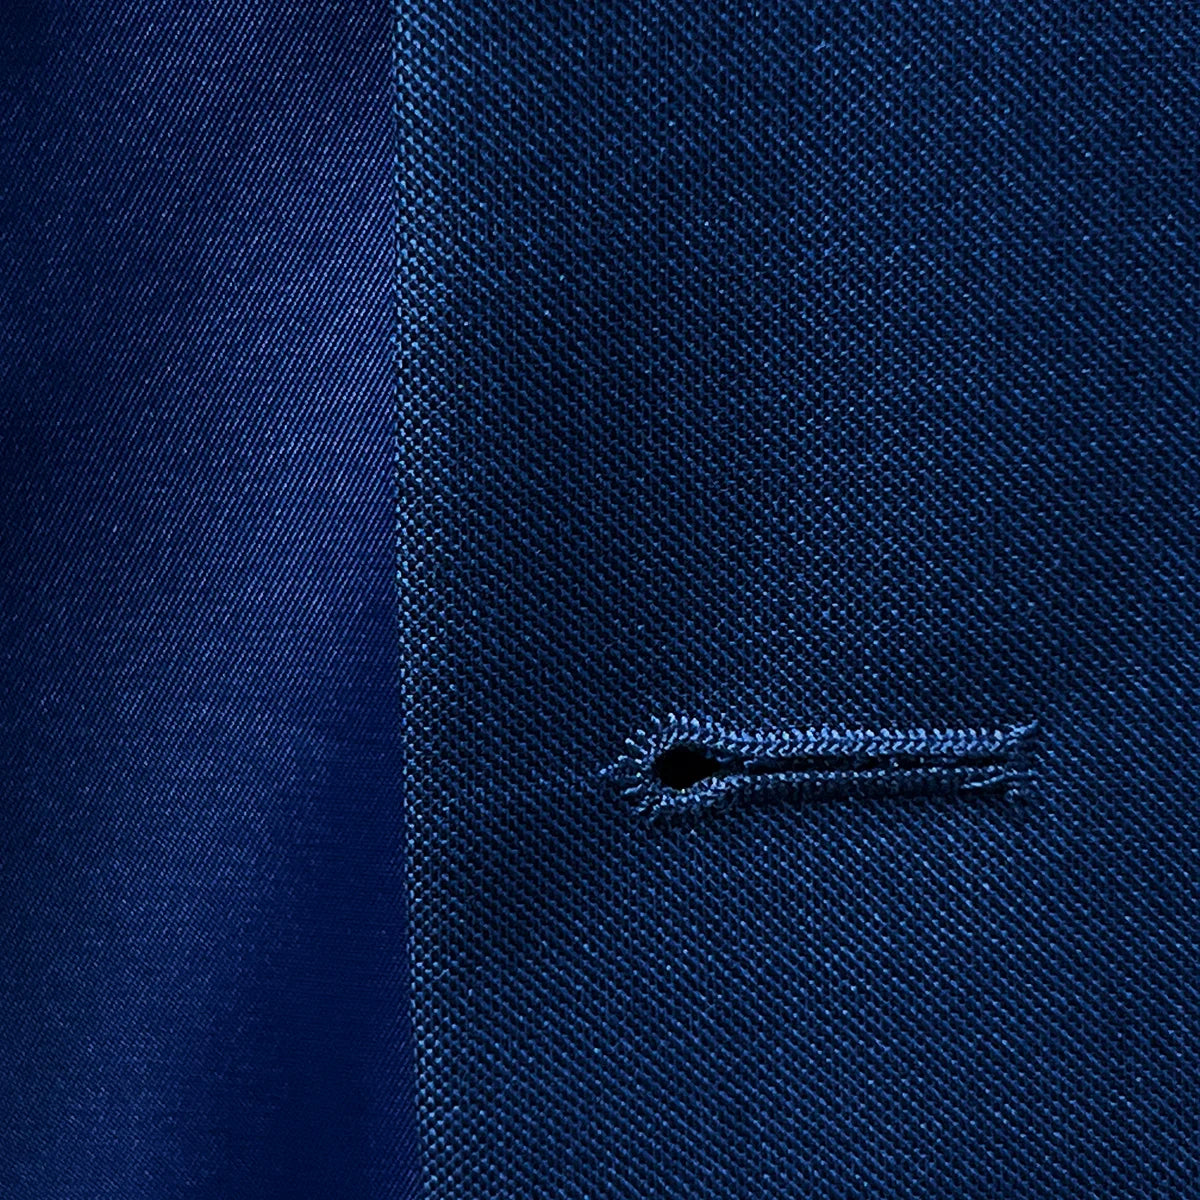 Close-up view of the meticulous buttonhole stitching on the cobalt blue sharkskin suit.